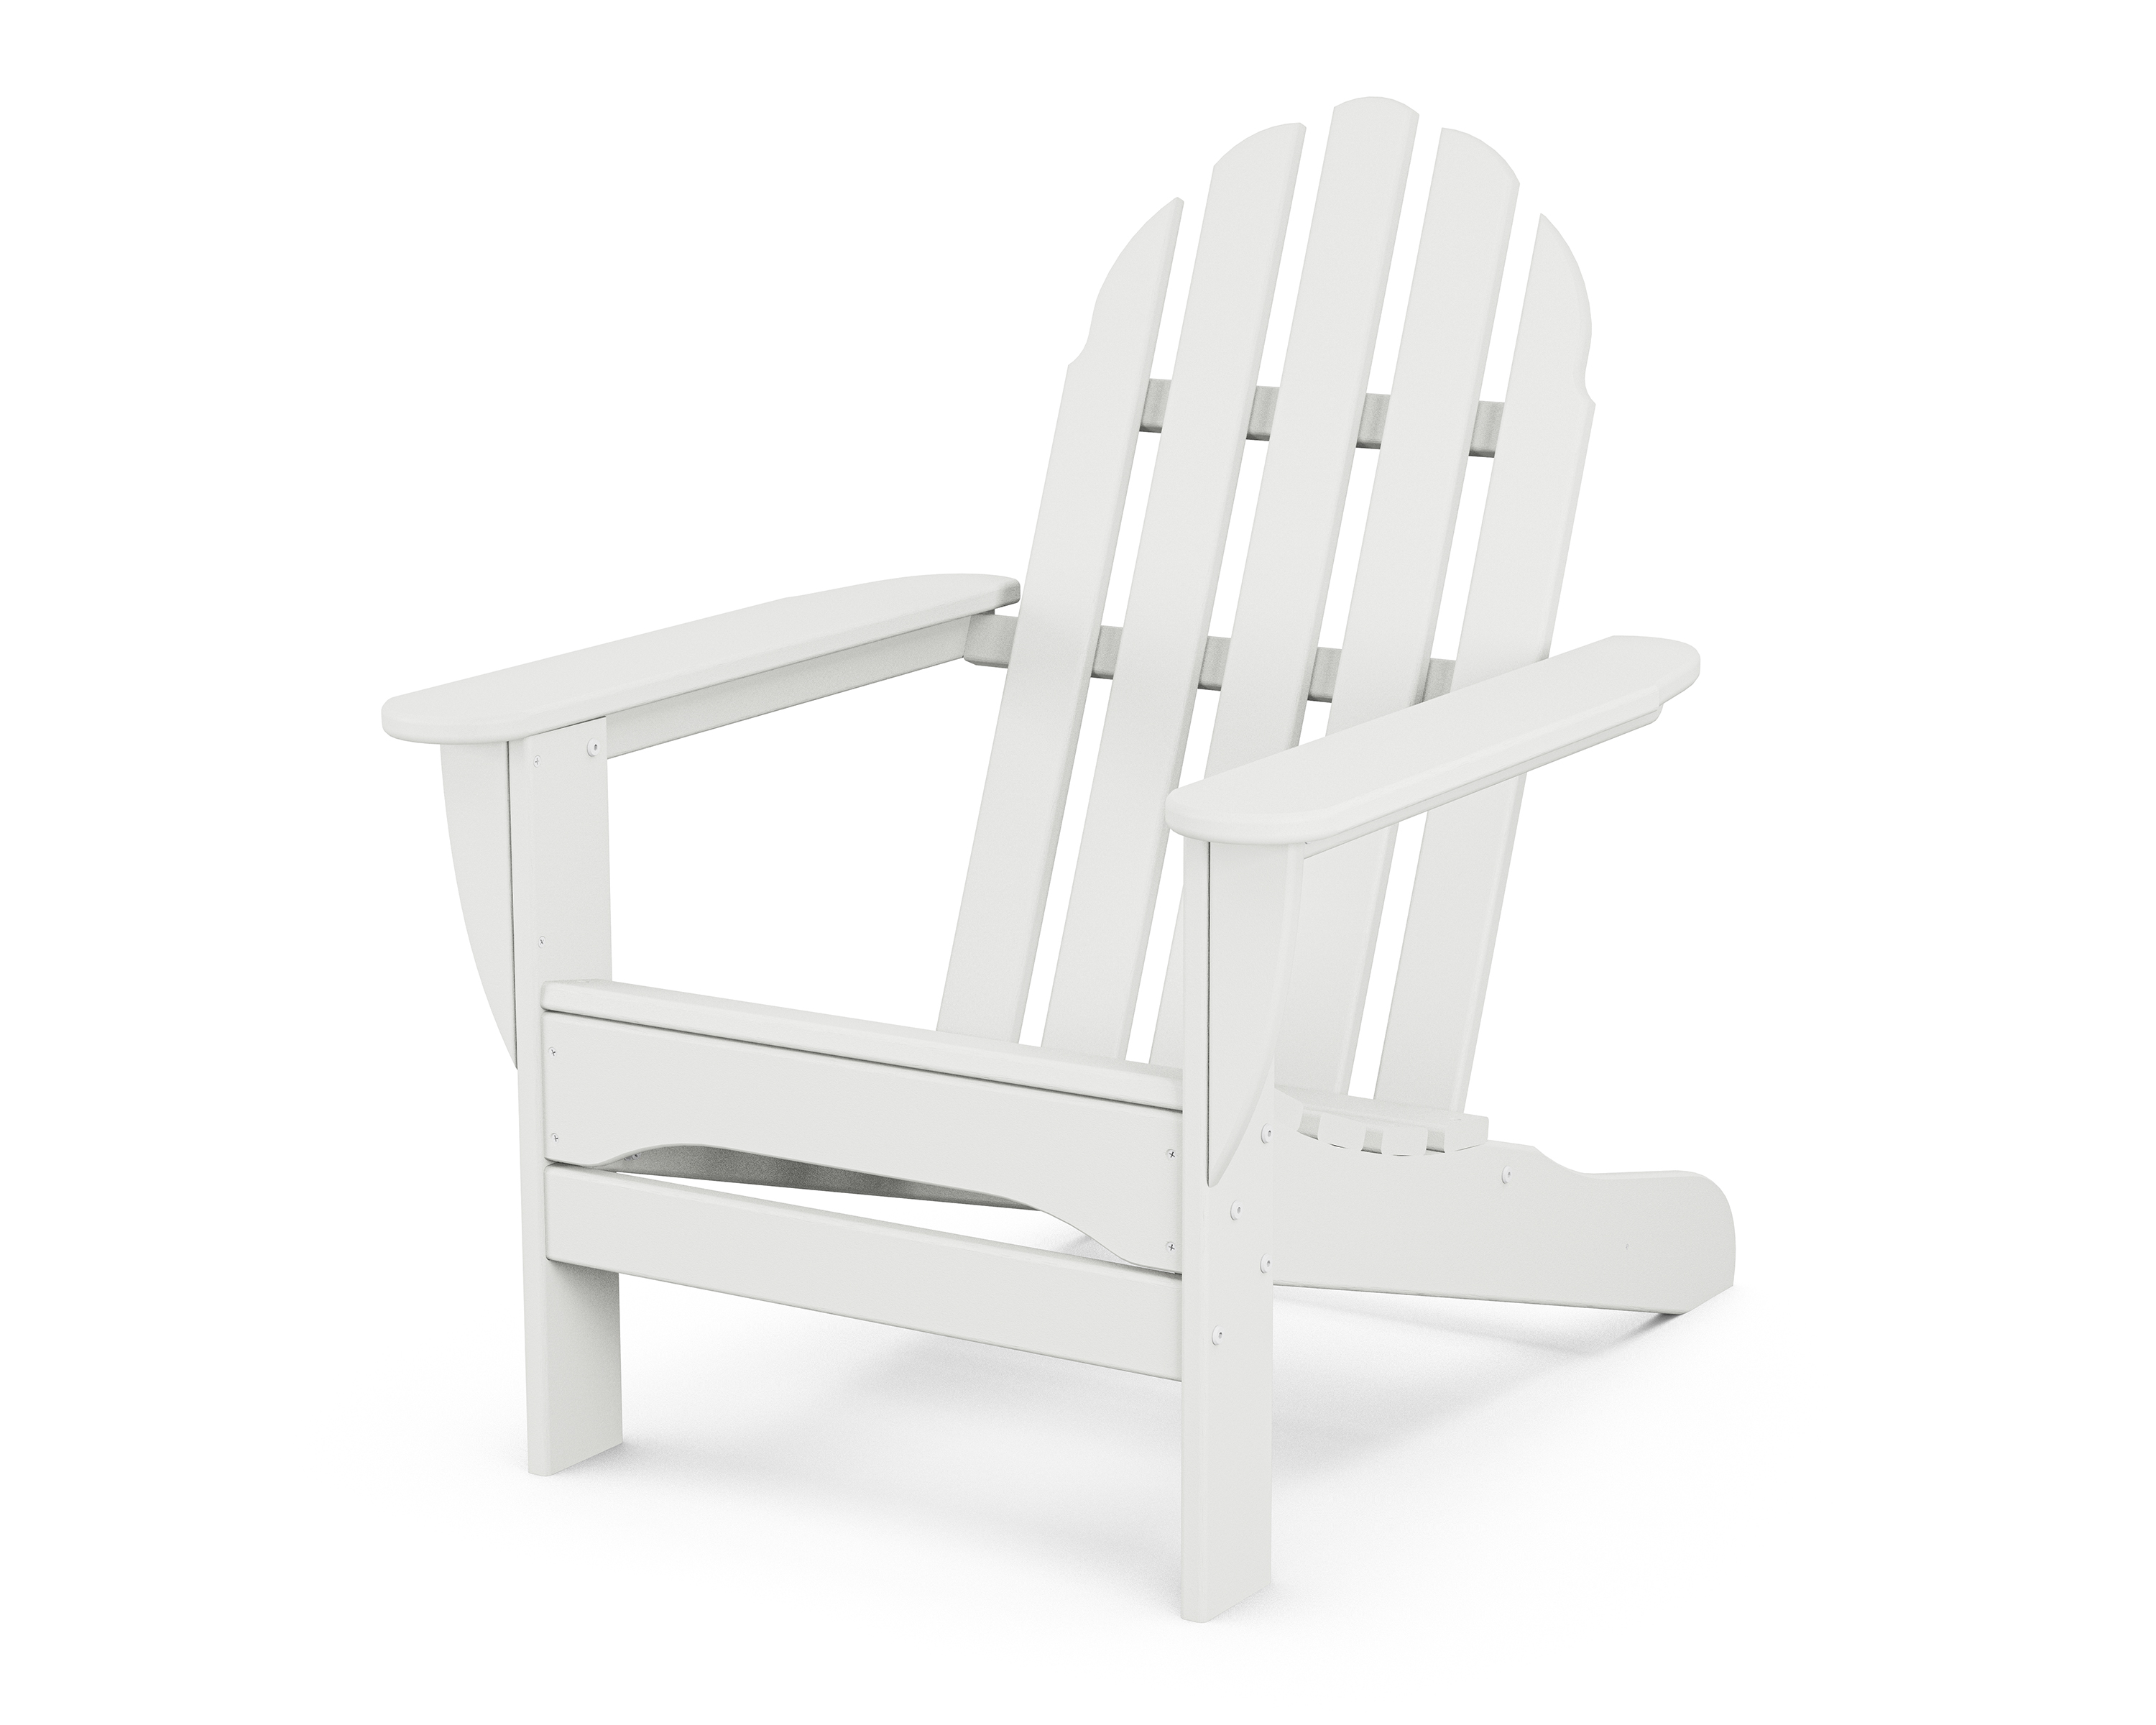 POLYWOOD Classic Adirondack 3-Piece Set with South Beach 18" Side Table in White - image 3 of 5